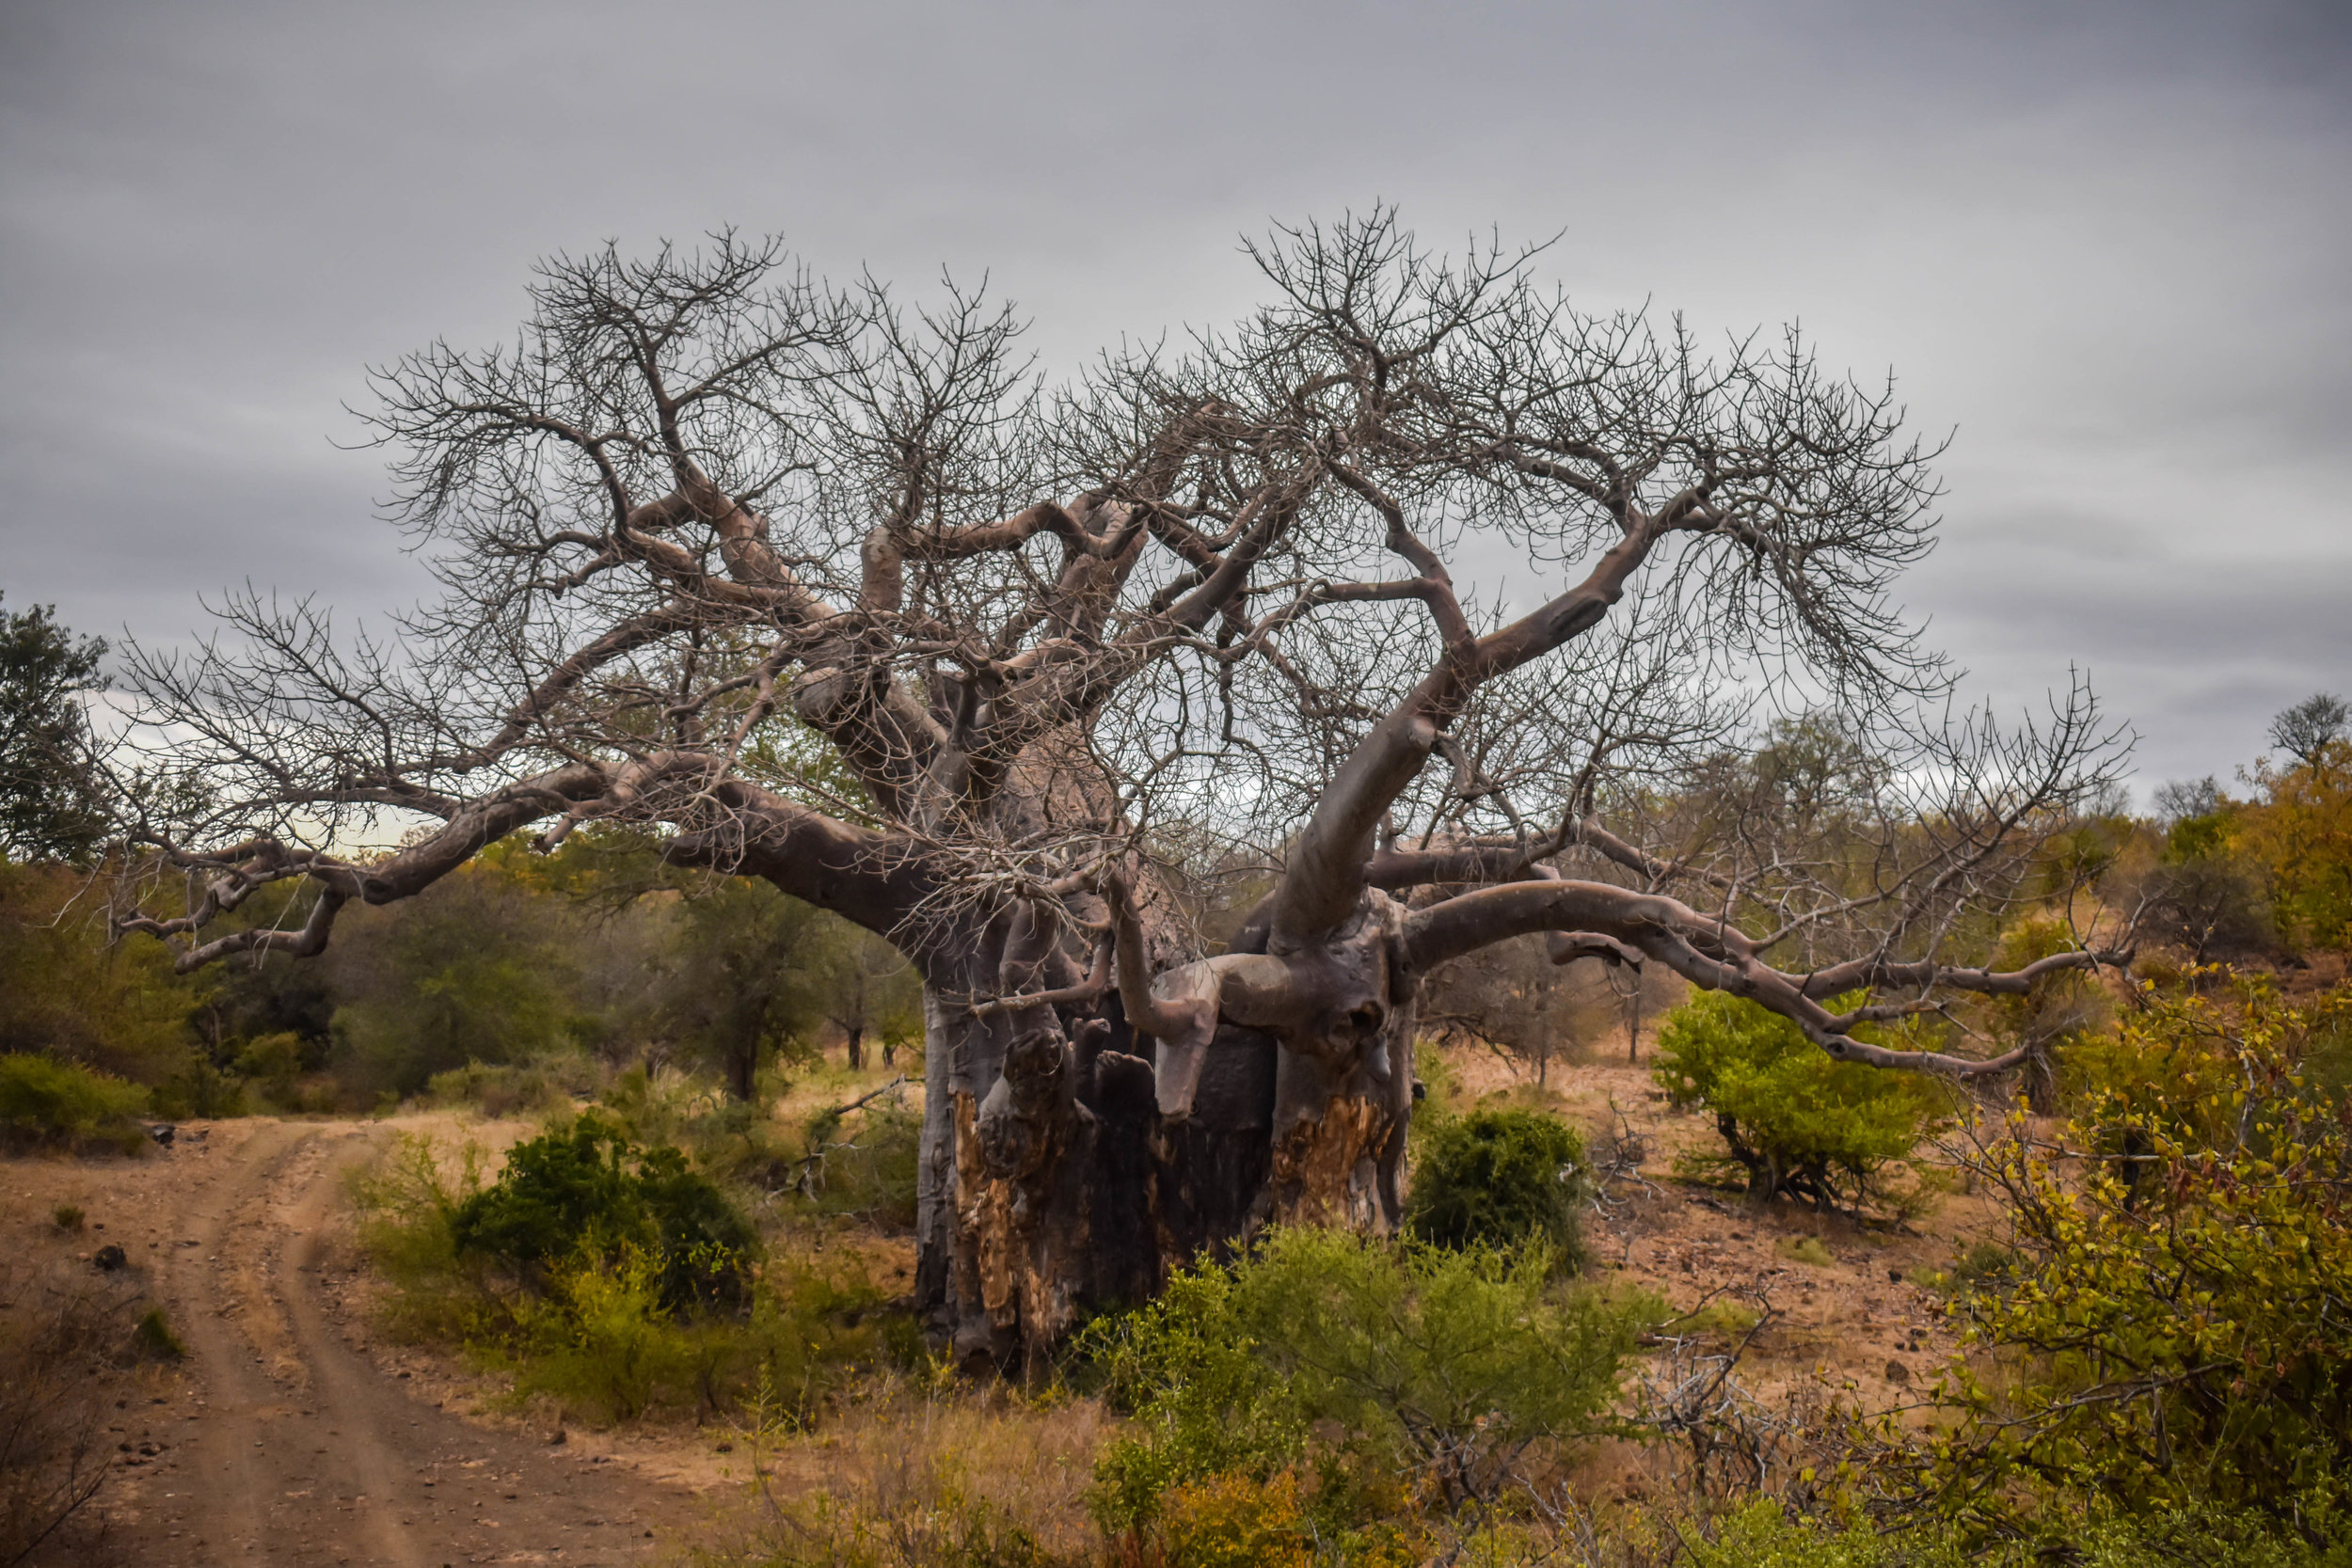 BAOBAB HEAVEN: Our area is known for the incredible number of baobabs growing here. This one is known as the Mapimbi Big Baobab, the oldest and largest baobab in the concession.